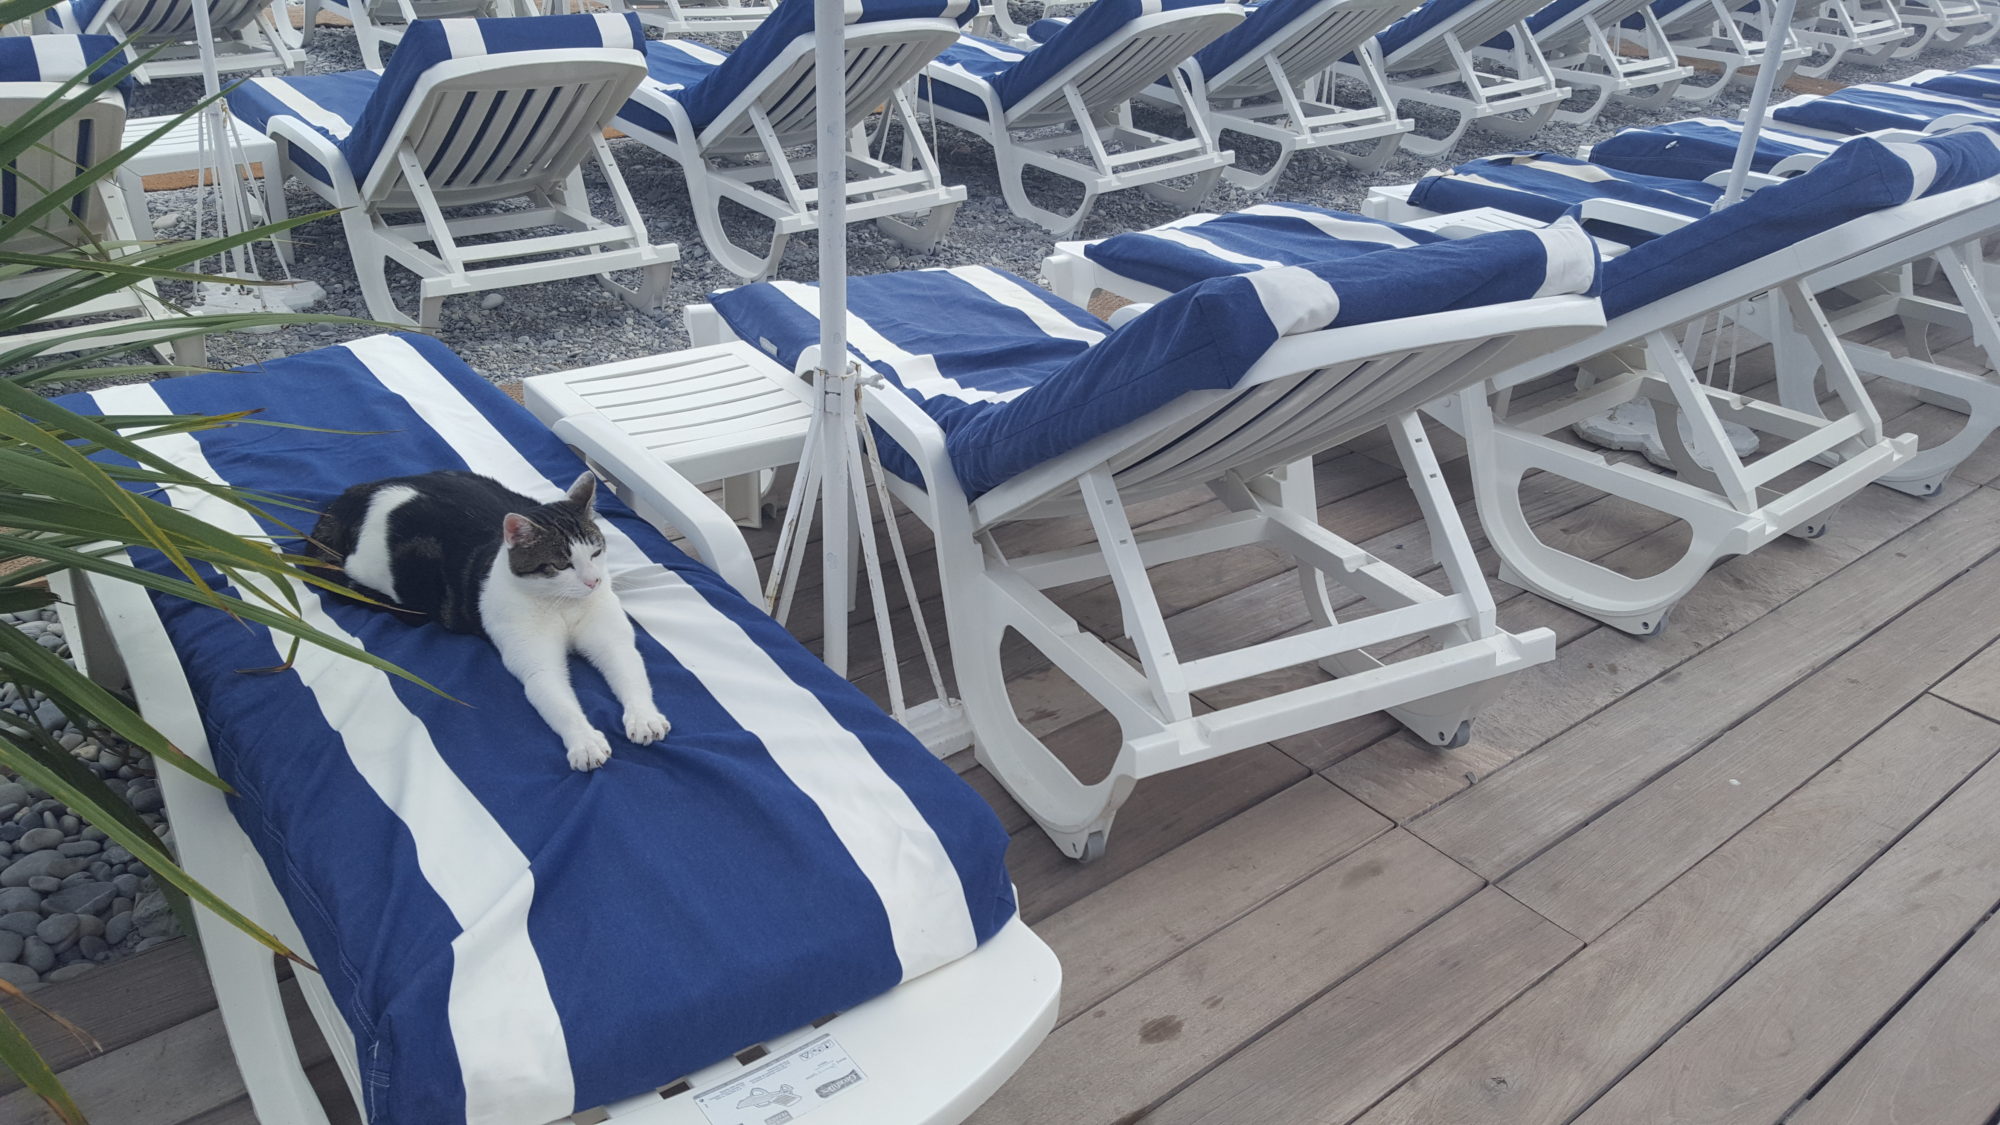 A cat on a lounge chair in France